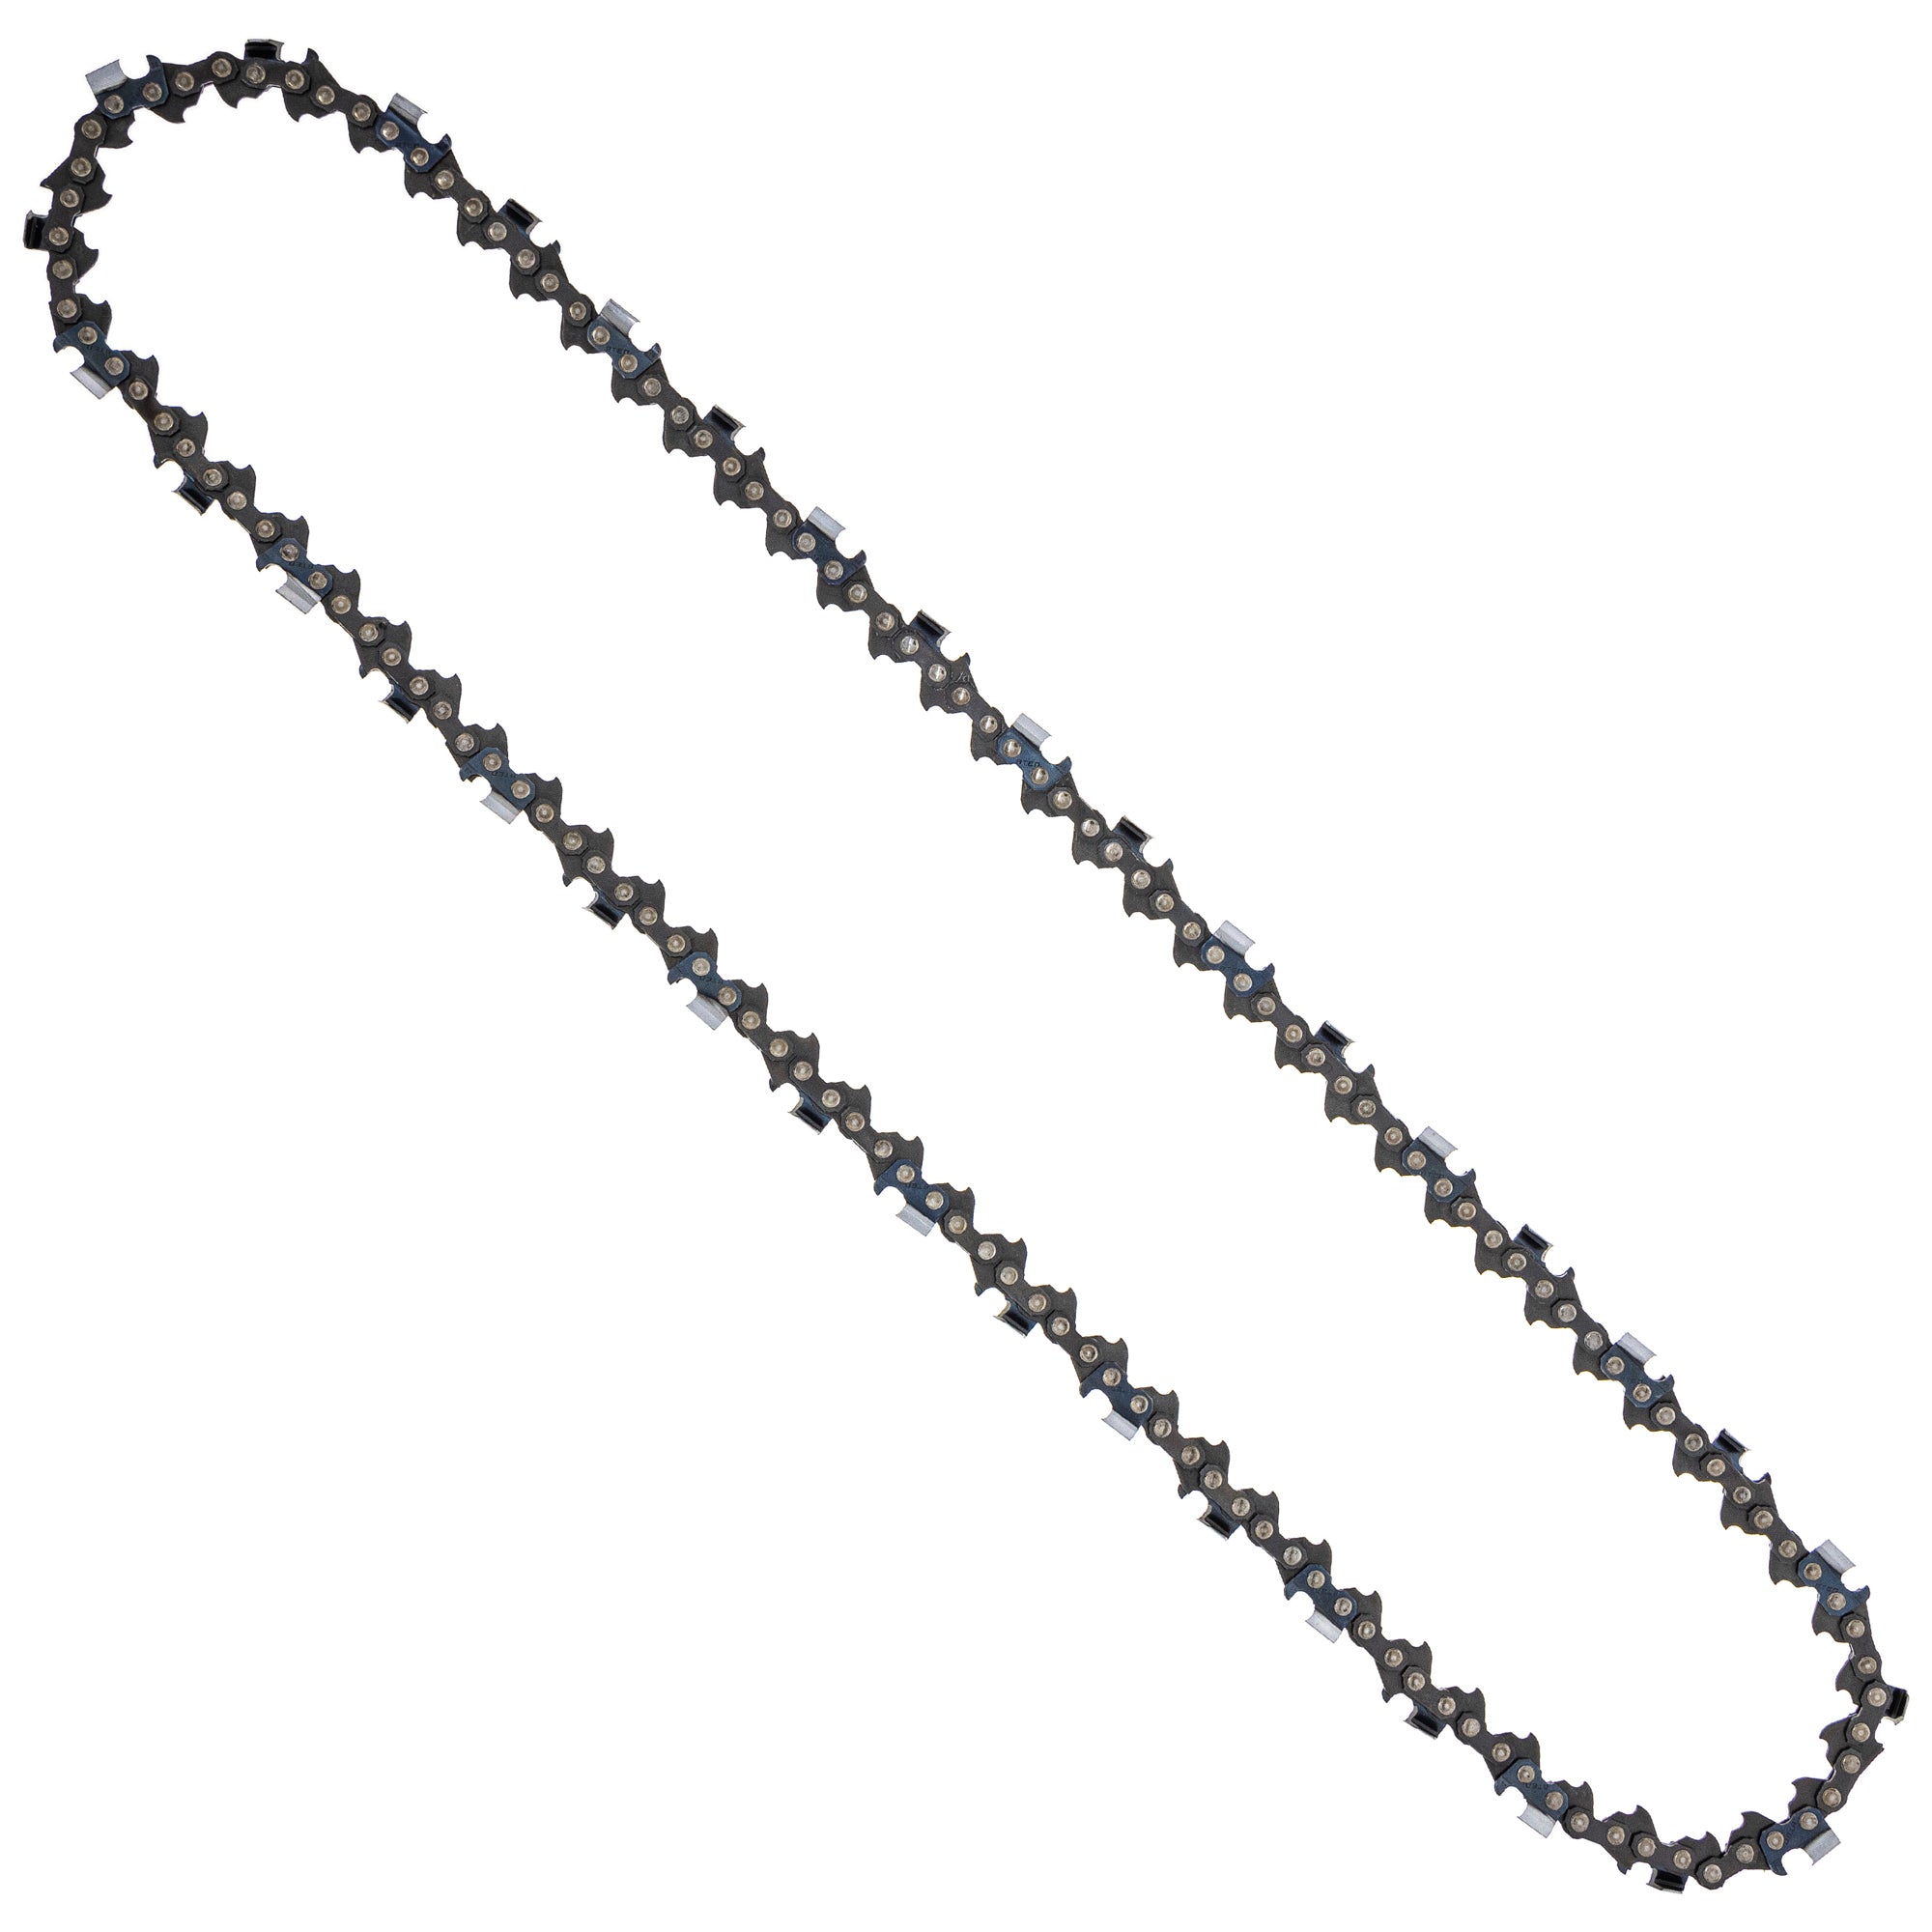 8TEN 810-CCC2263H Chain 4-Pack for zOTHER Oregon Husqvarna Poulan